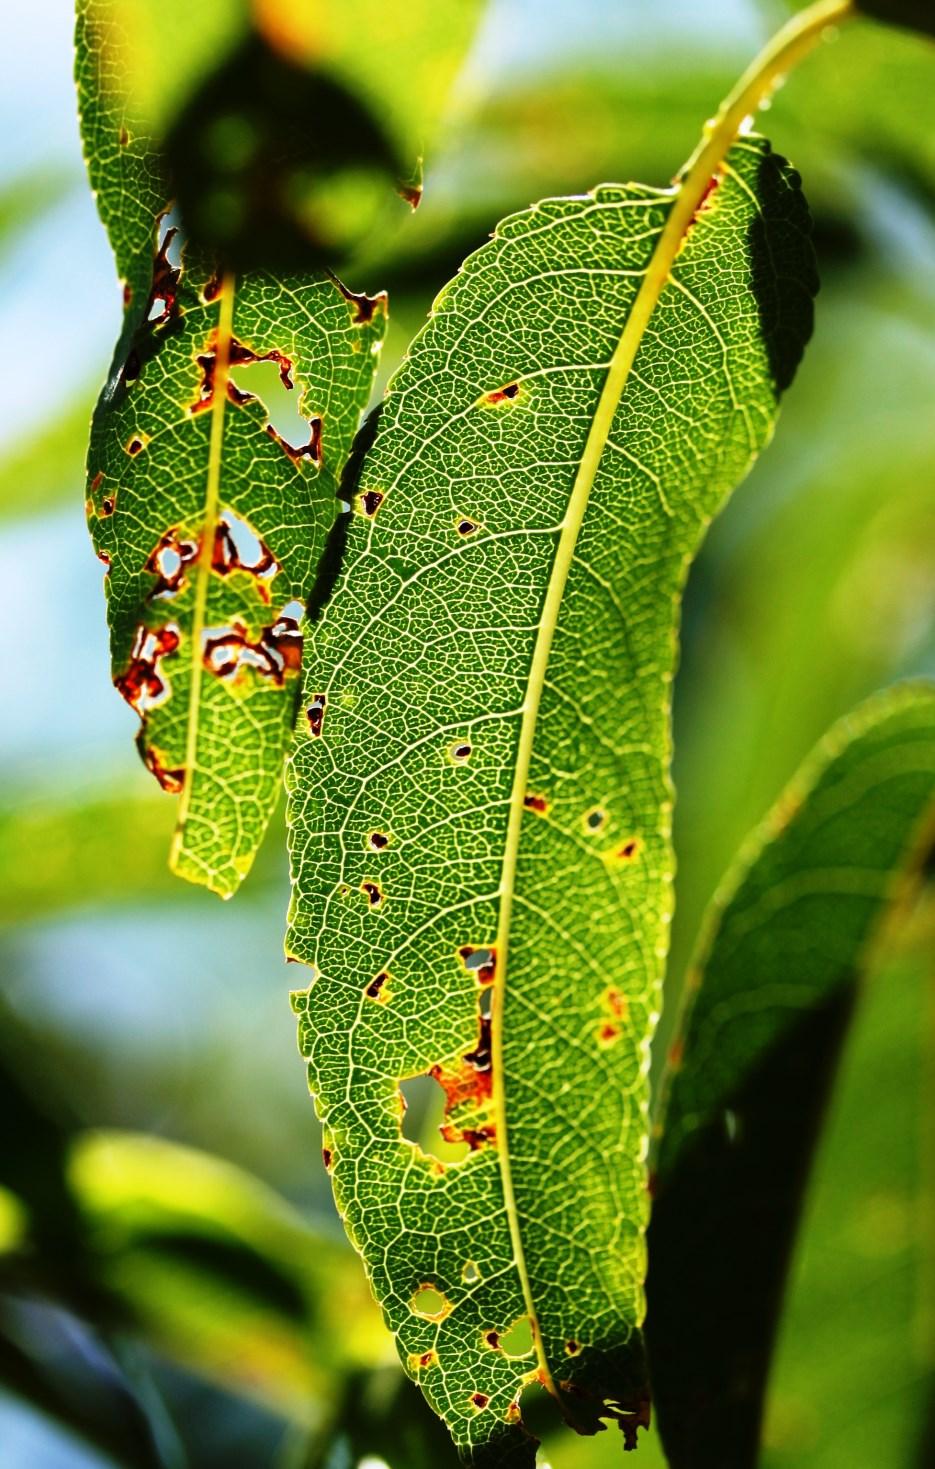 anthracnose symptoms. Leaves may show spots (Figure 3), turn yellow, and drop prematurely. Twigs may show visible lesions or cankers (Figure 4), which may be a source of overwintering inoculum.